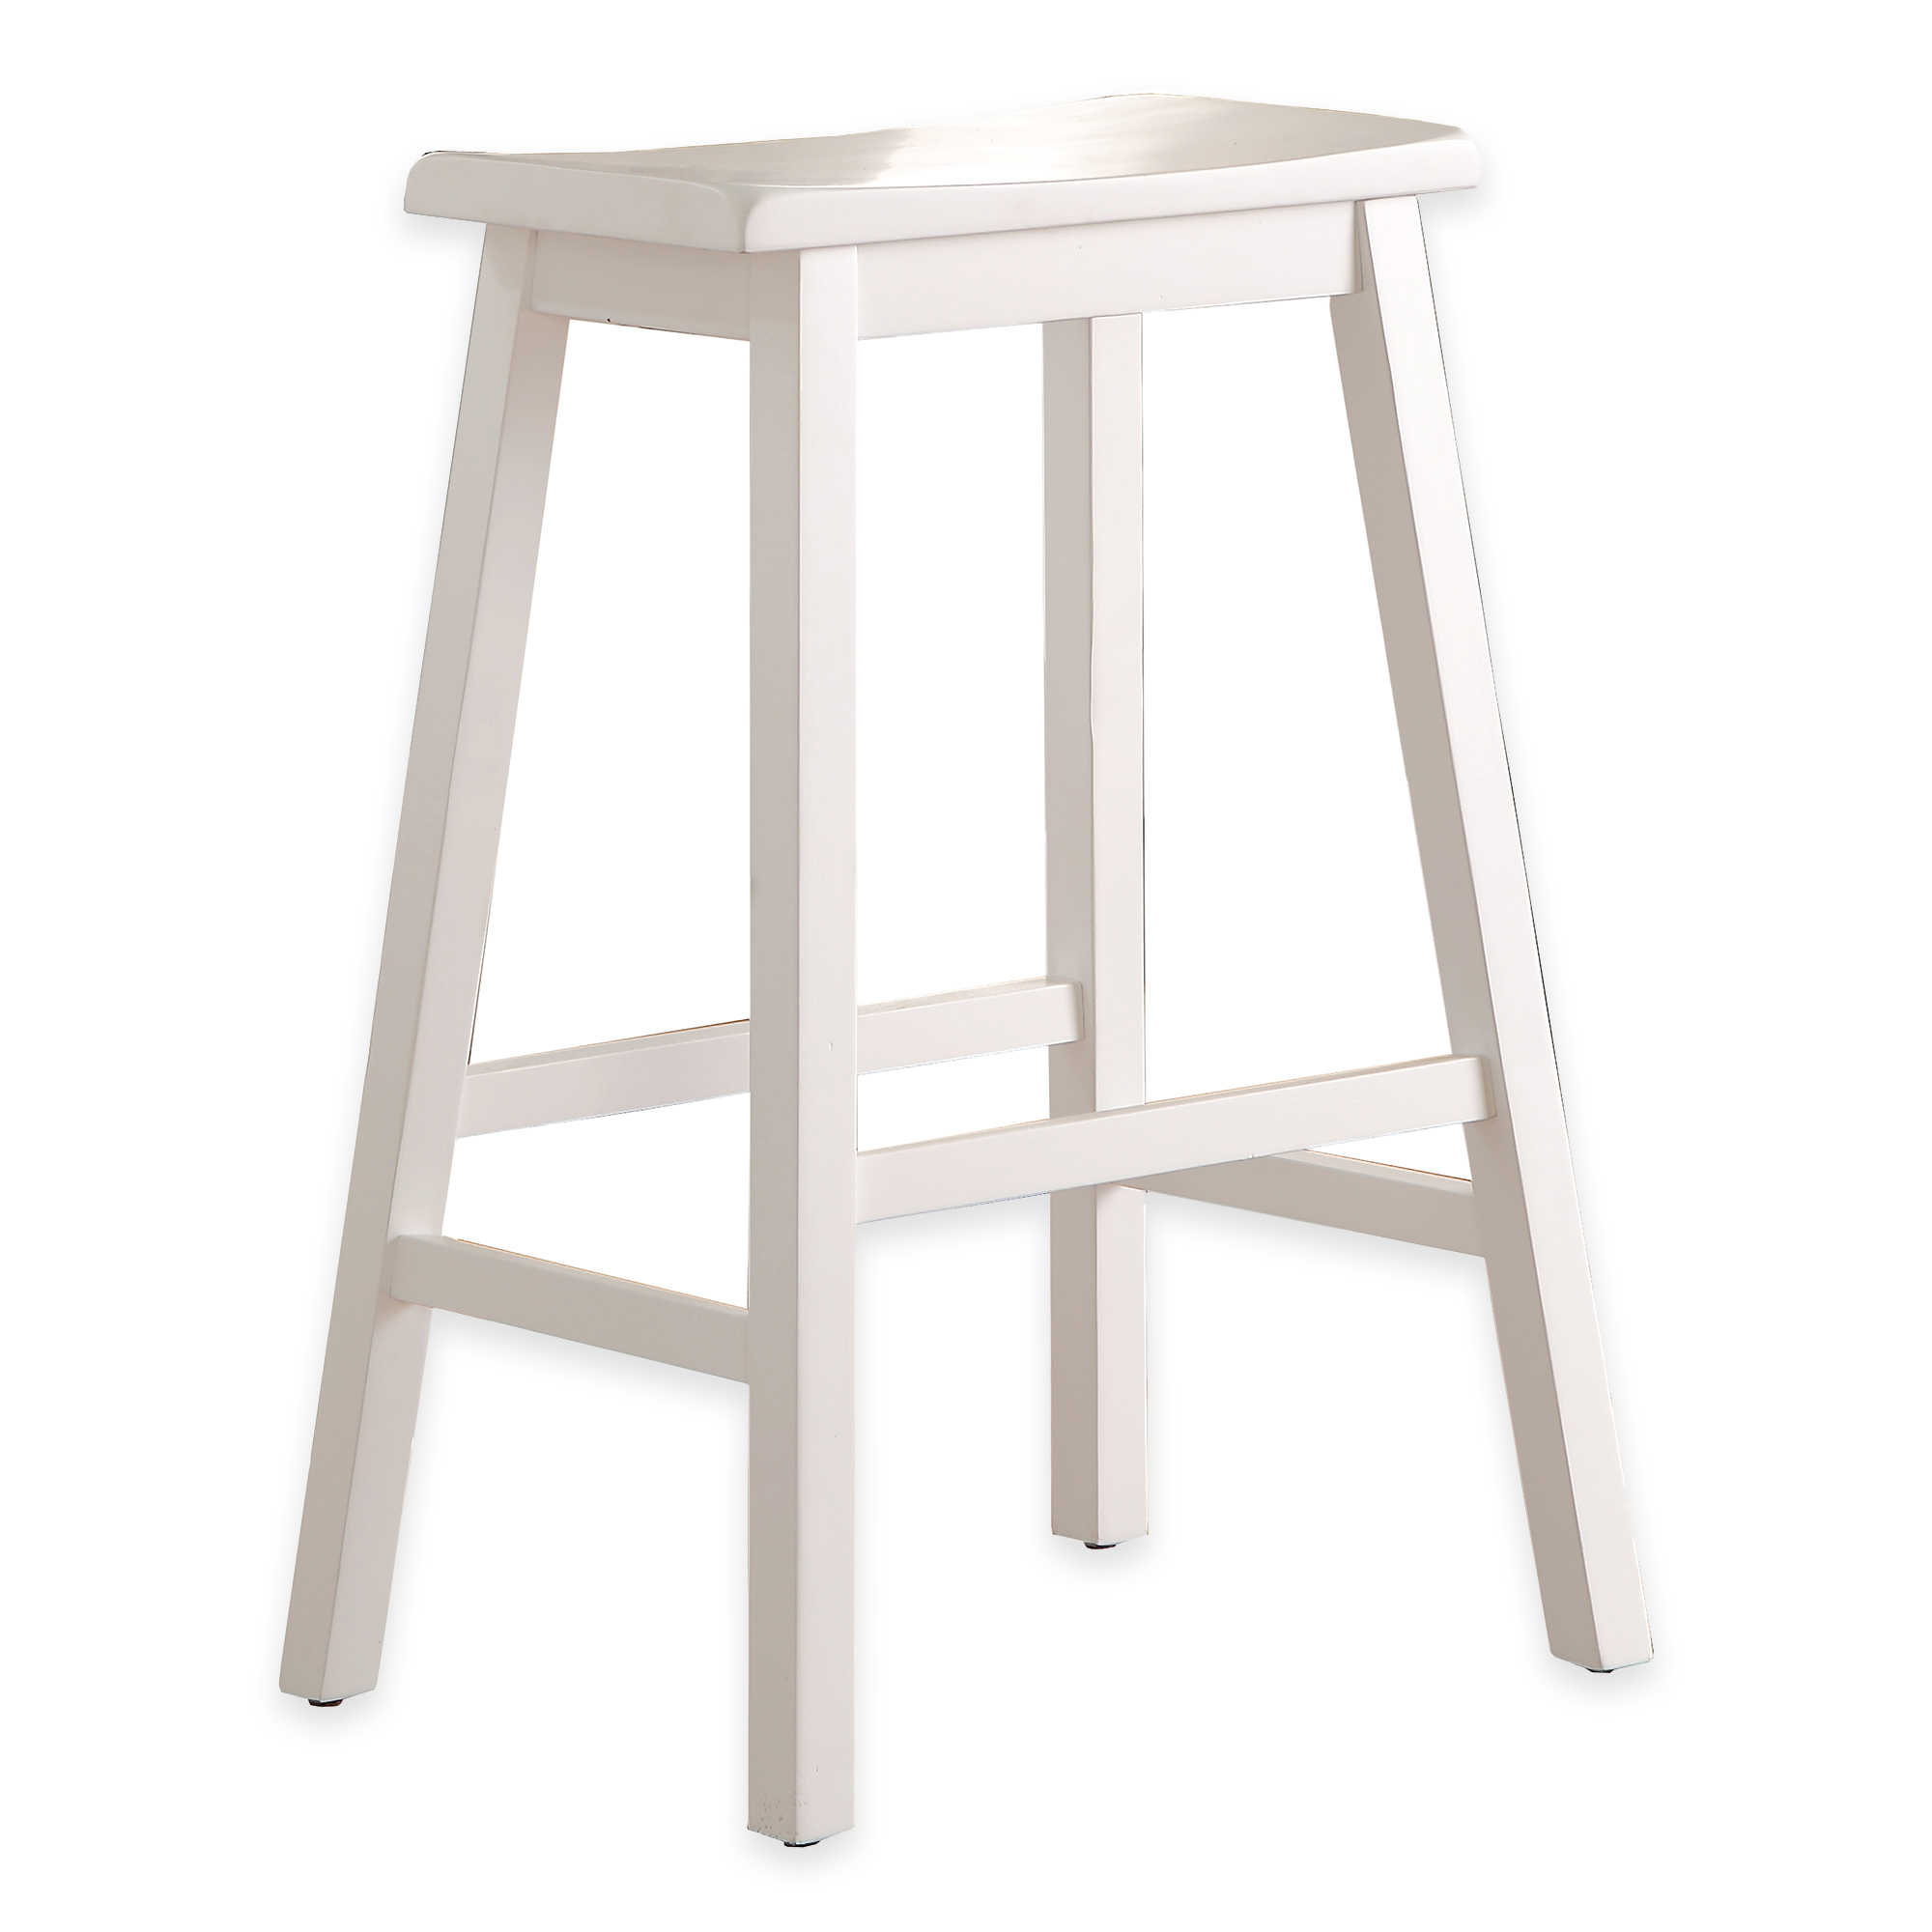 Wood saddle 29-inch bar stool in white for $30